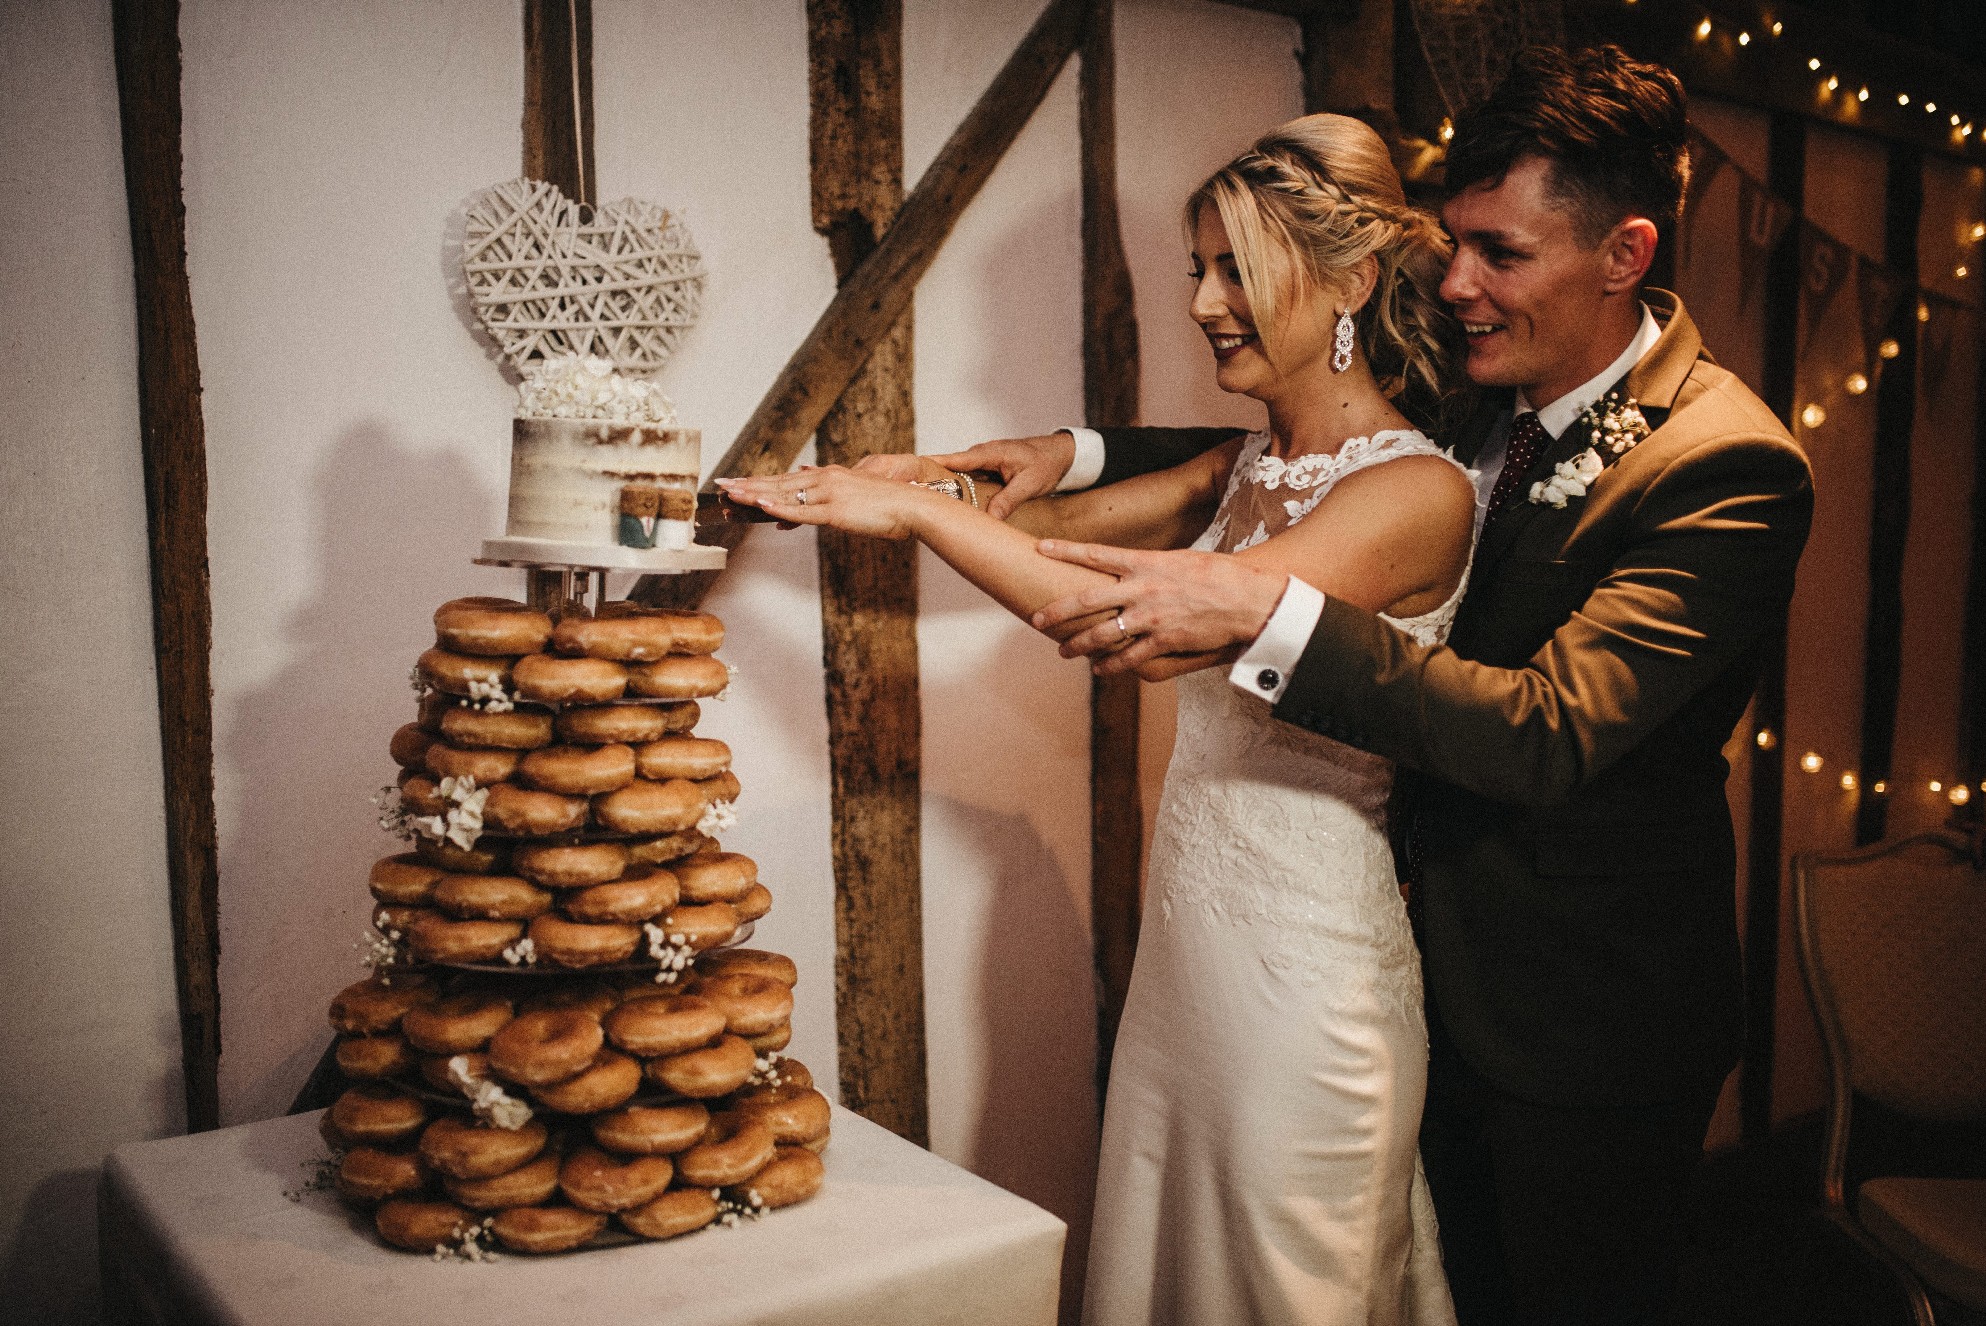 A young bride and groom smiling as they cut a small wedding cake above a tier of doughnuts.jpg